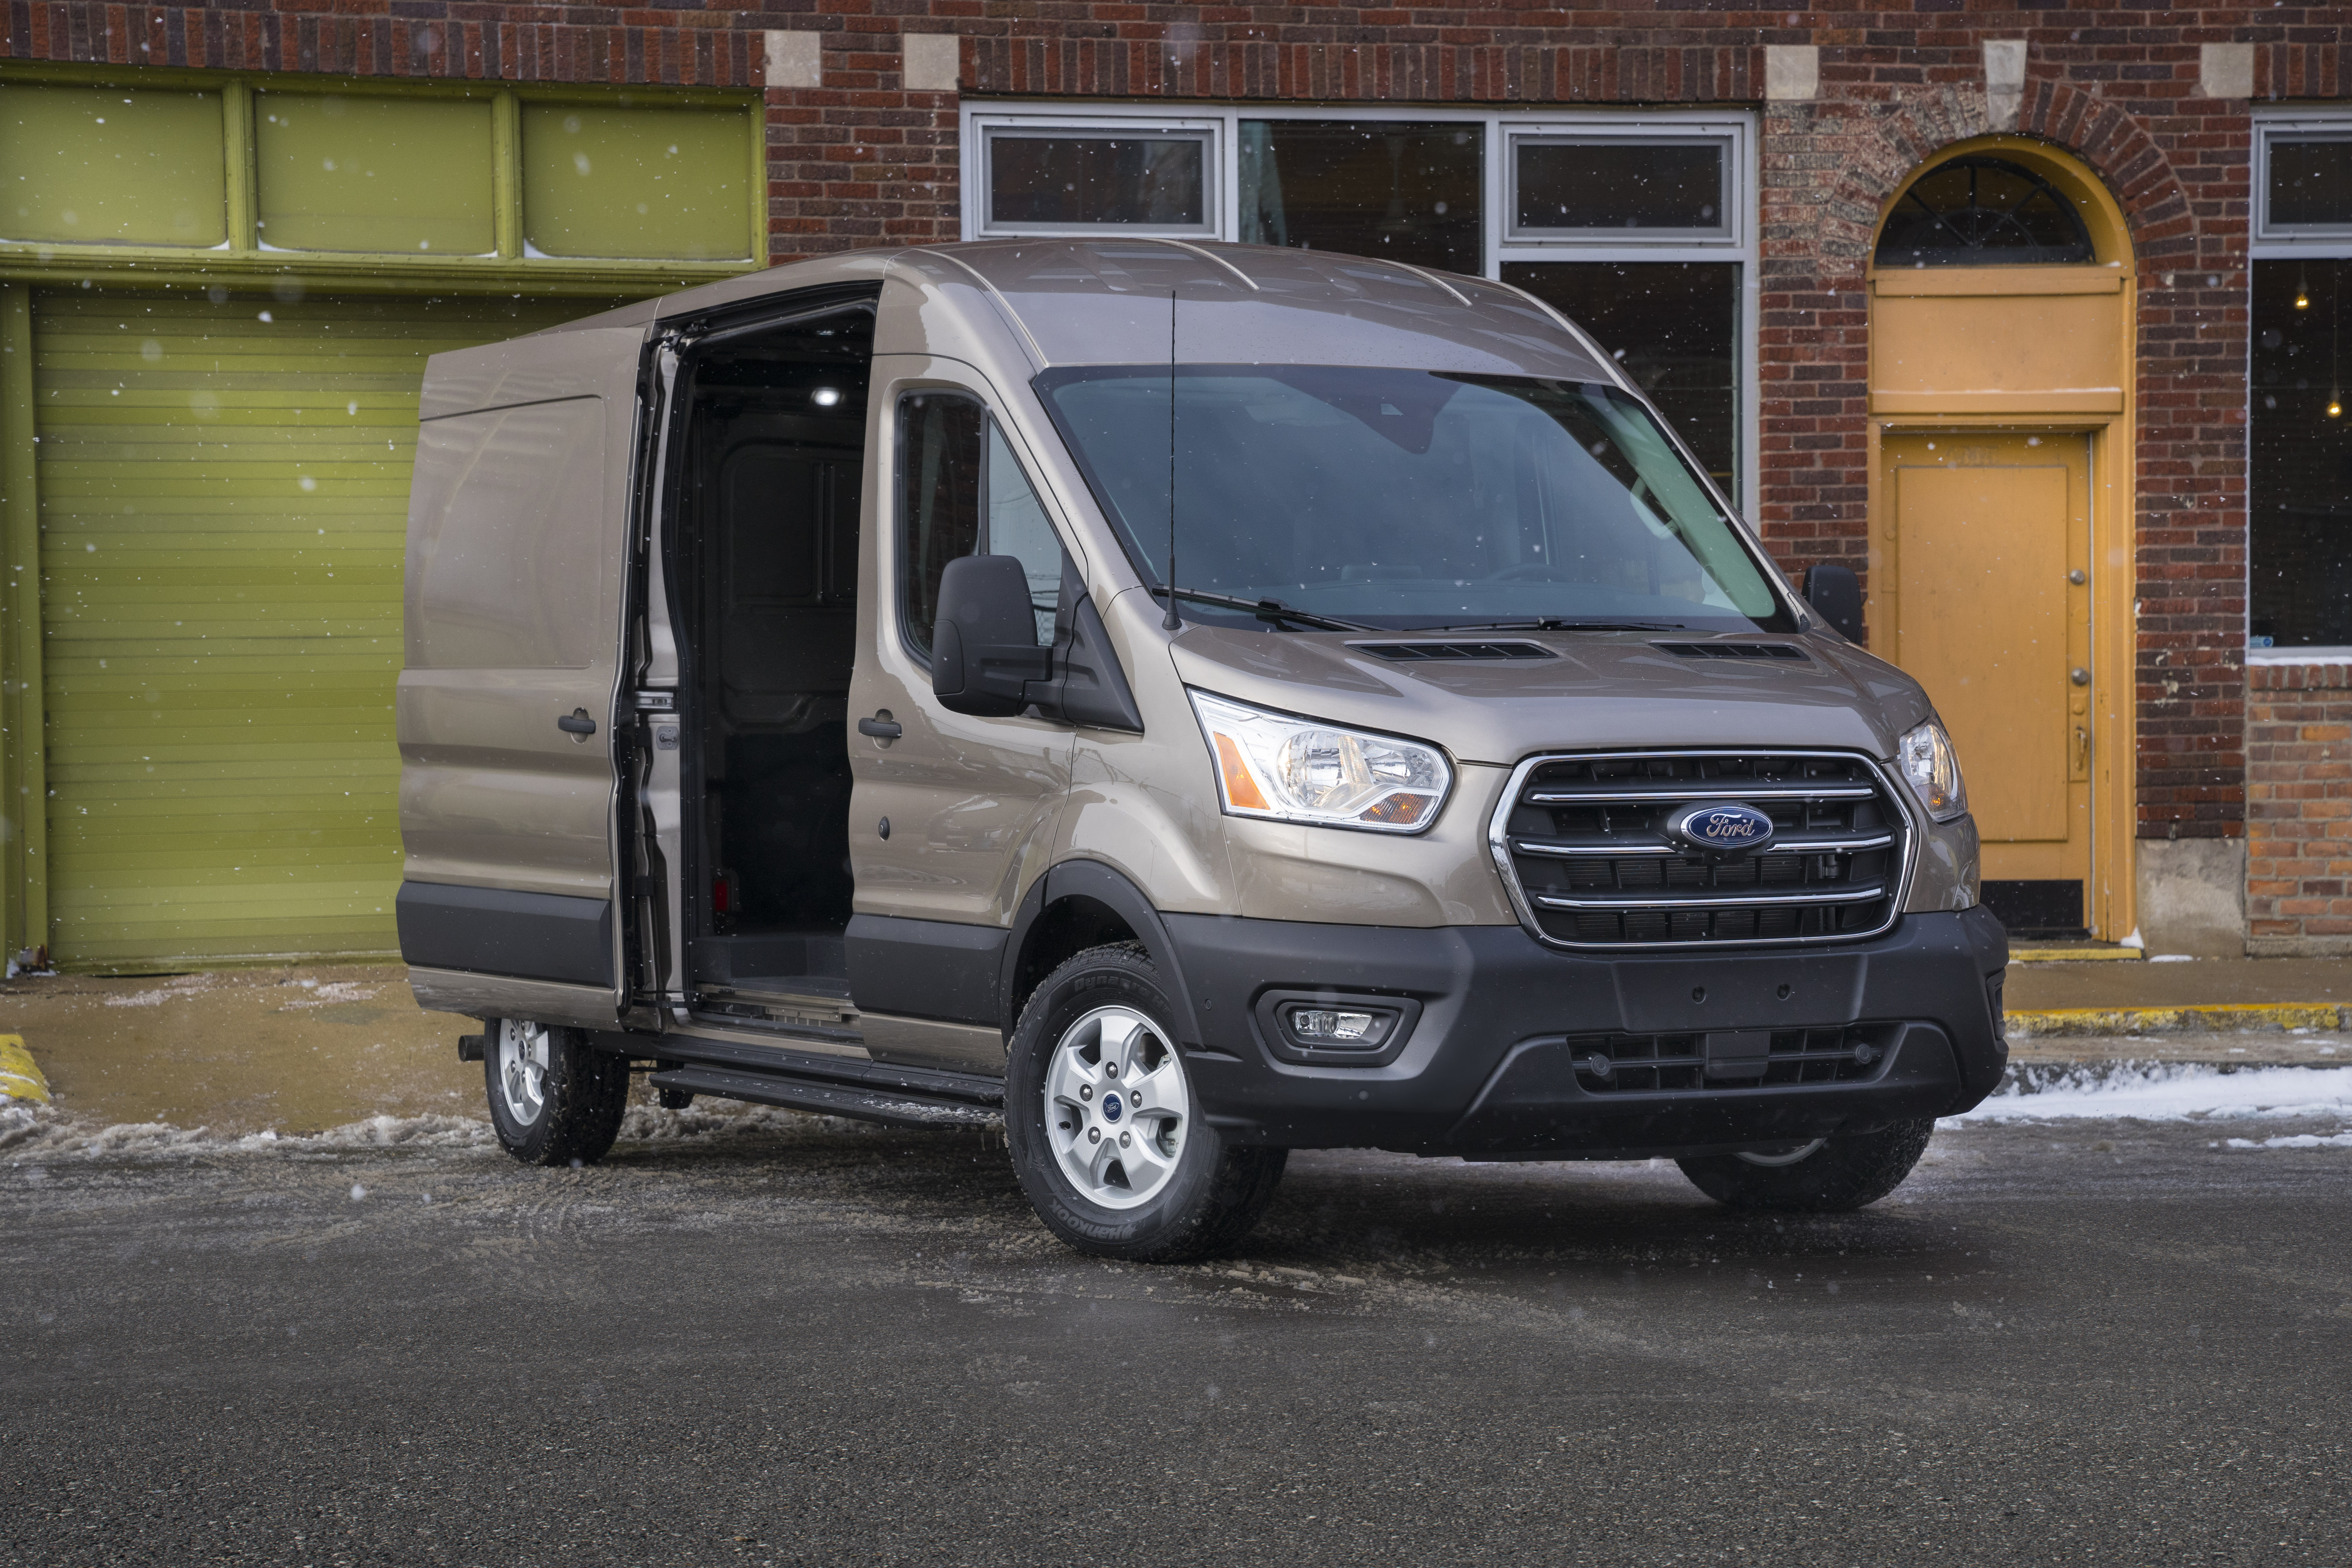 5 Reasons The Ford Transit Is Better Than The Mercedes Sprinter